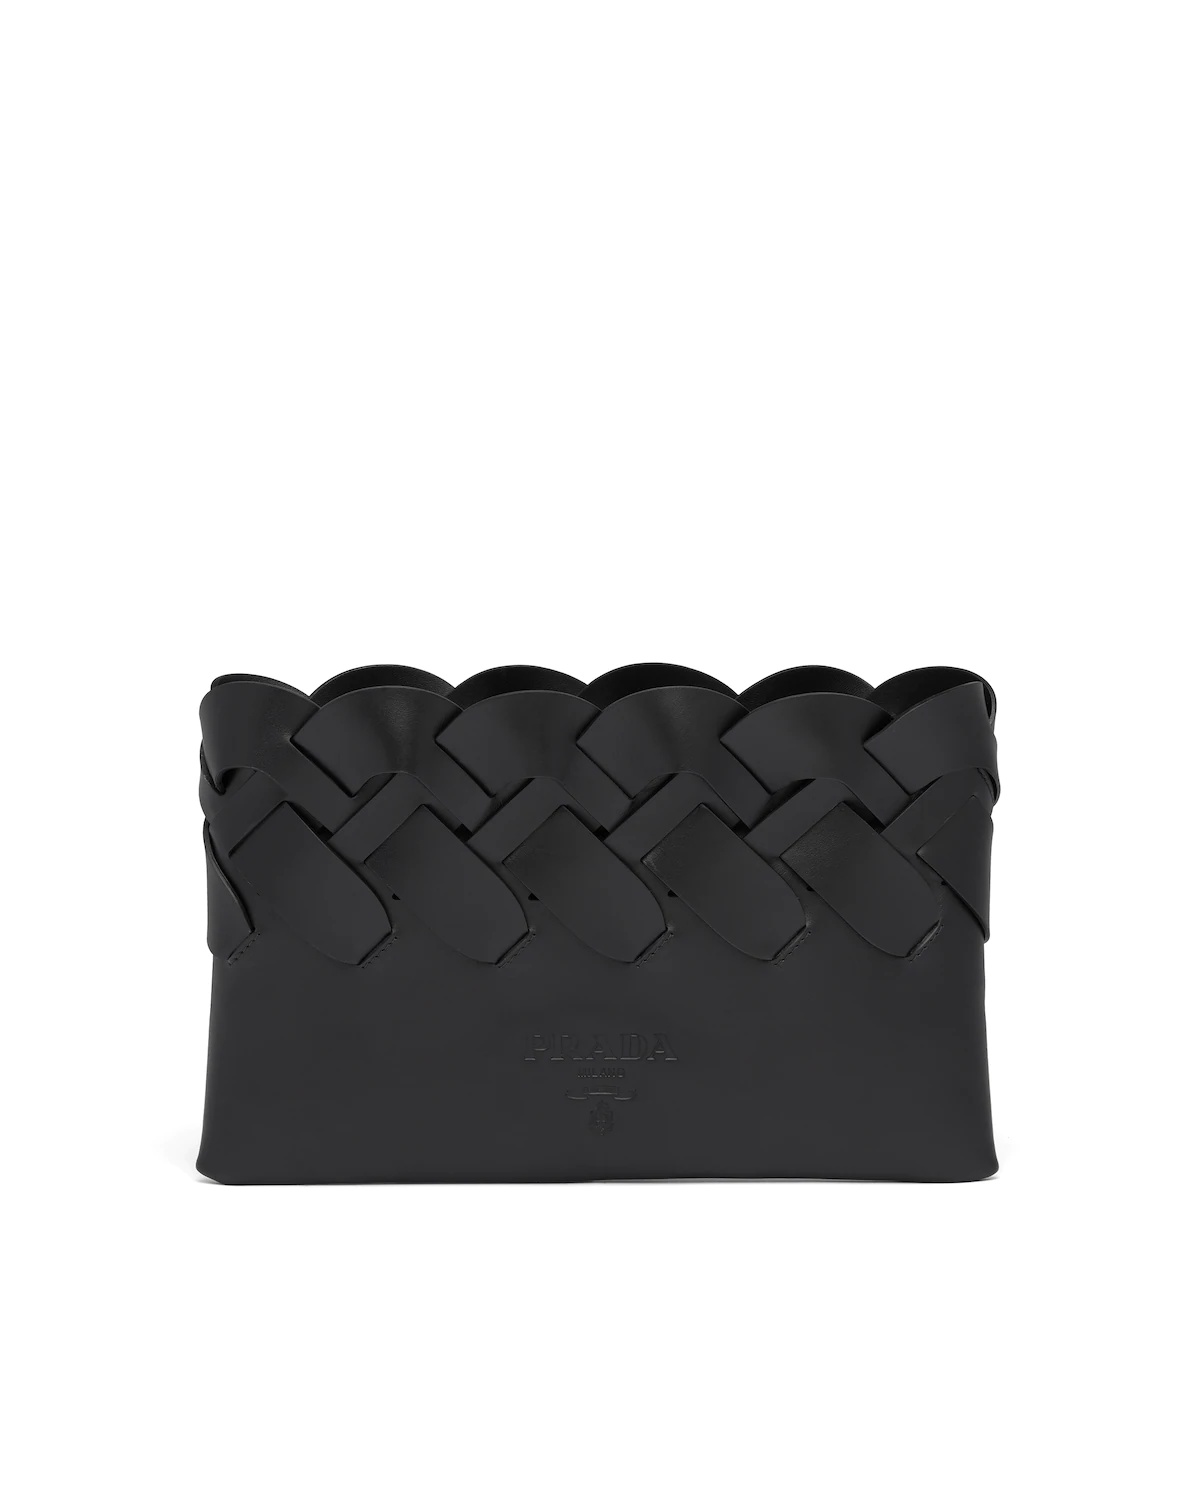 Prada Tress leather clutch with large woven motif - 1